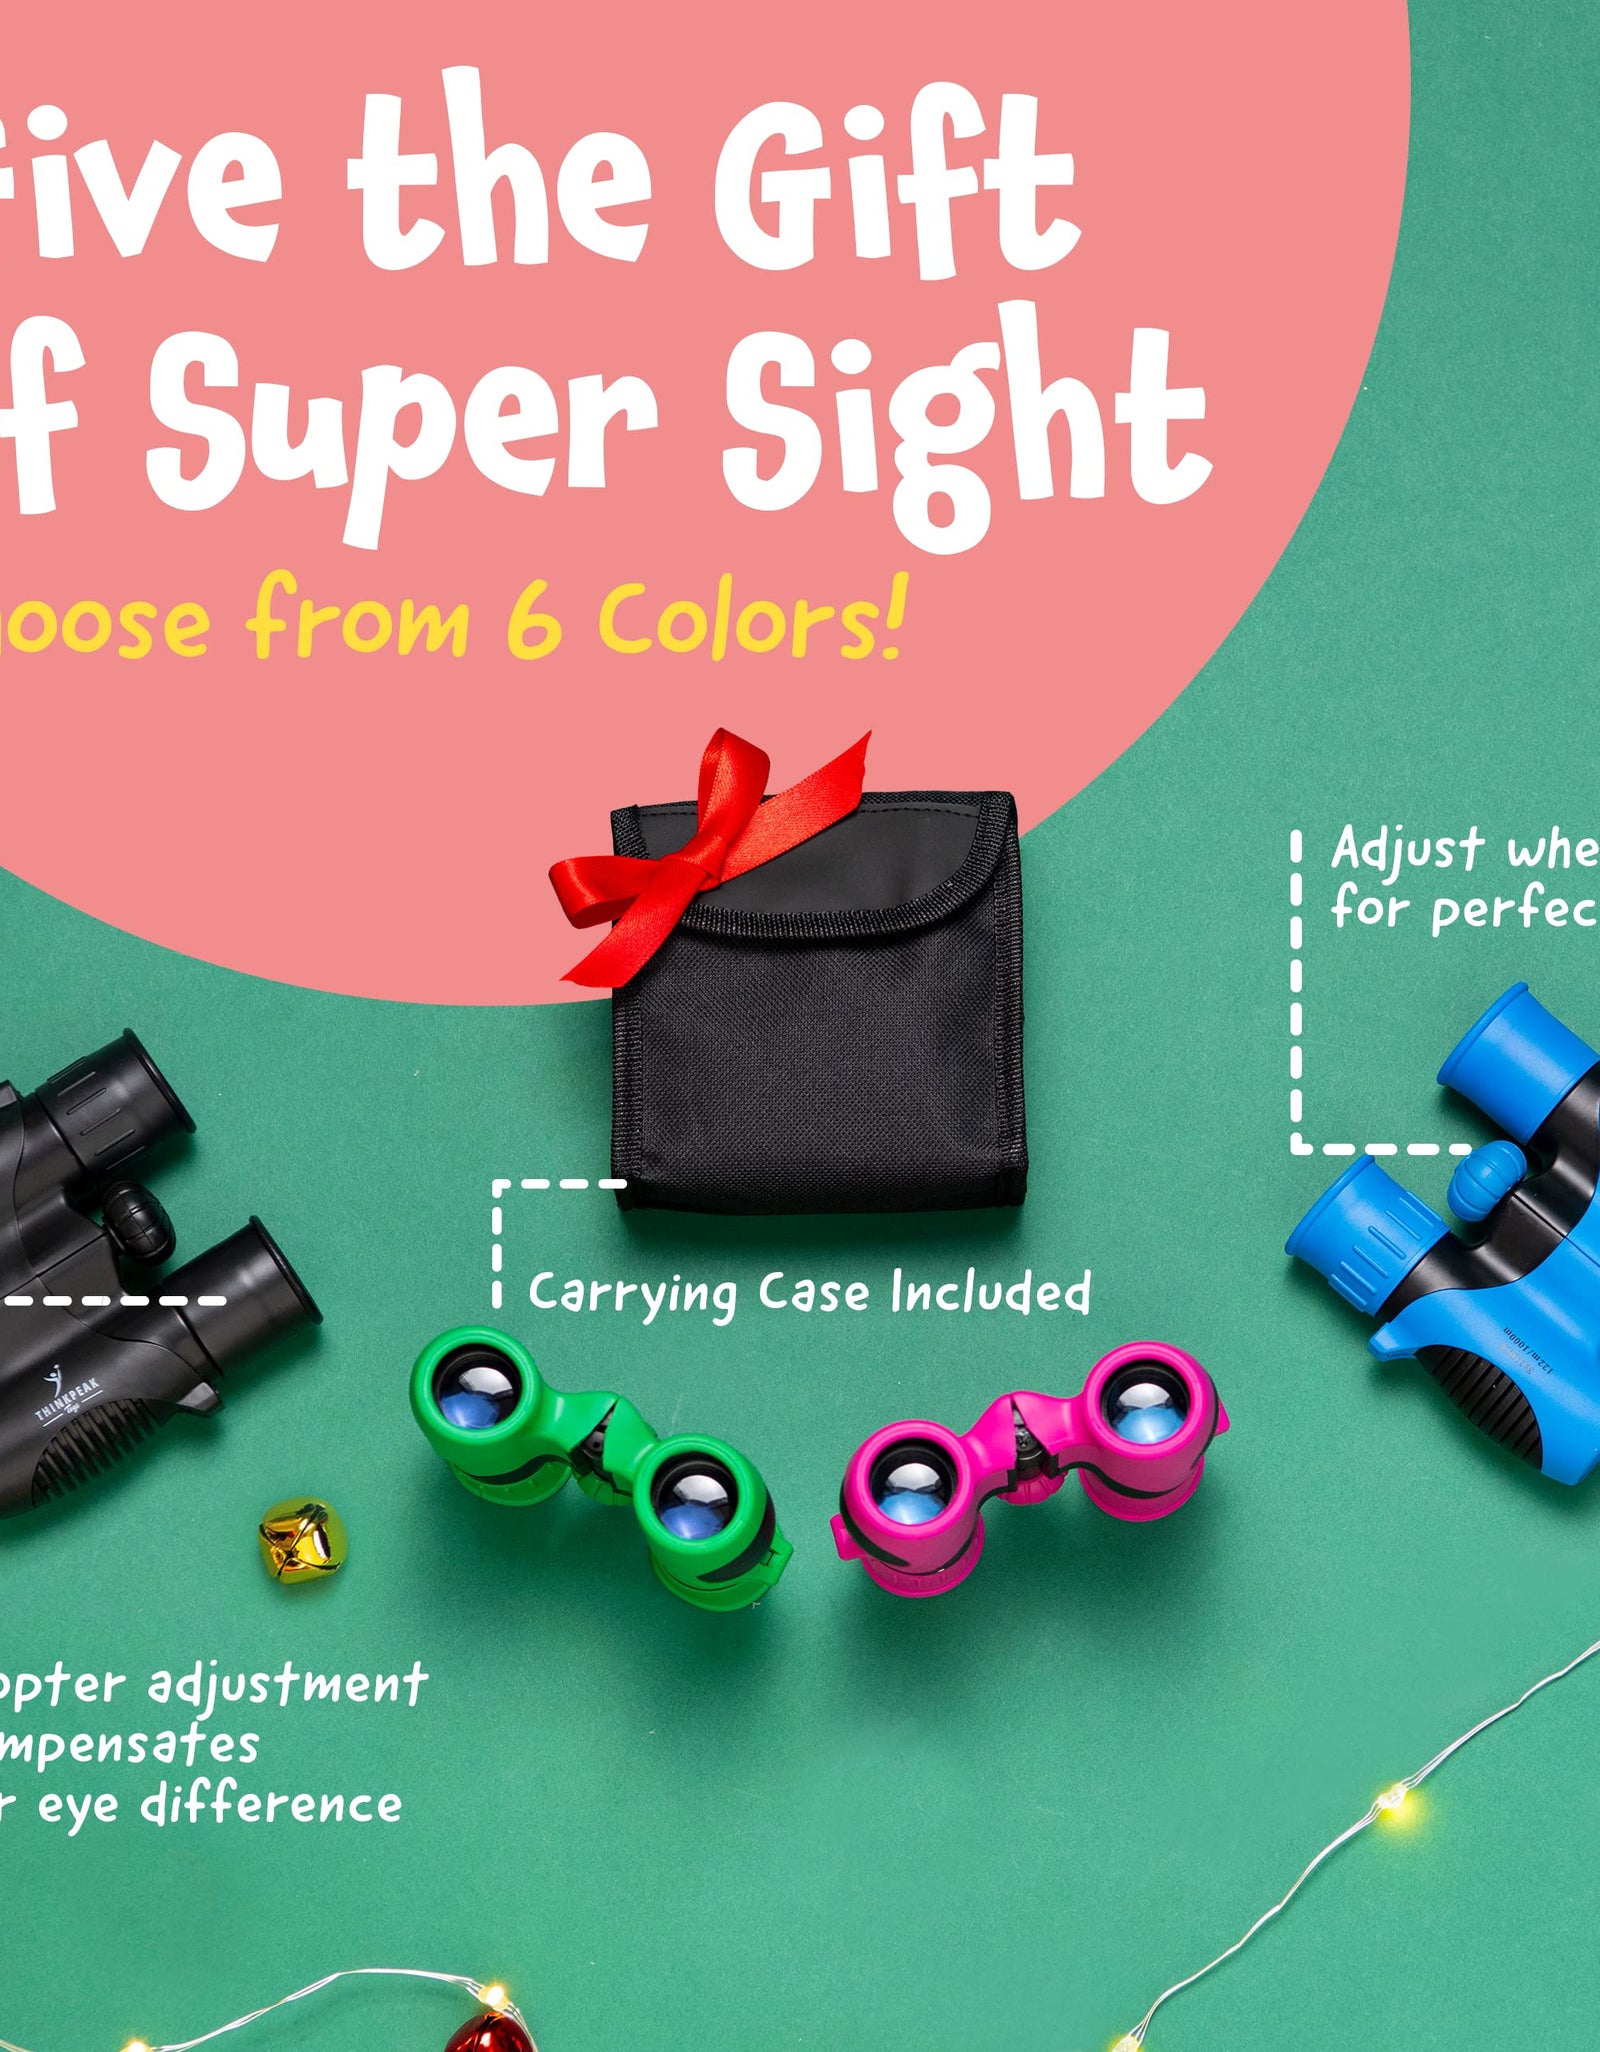 Binoculars for Kids - Small, Compact, Shock-Resistant Toy Binoculars - Learning & Nature Exploration Toys for 4+ Year Old Girls and Boys - Think Peak Toys Kids Binoculars, Green